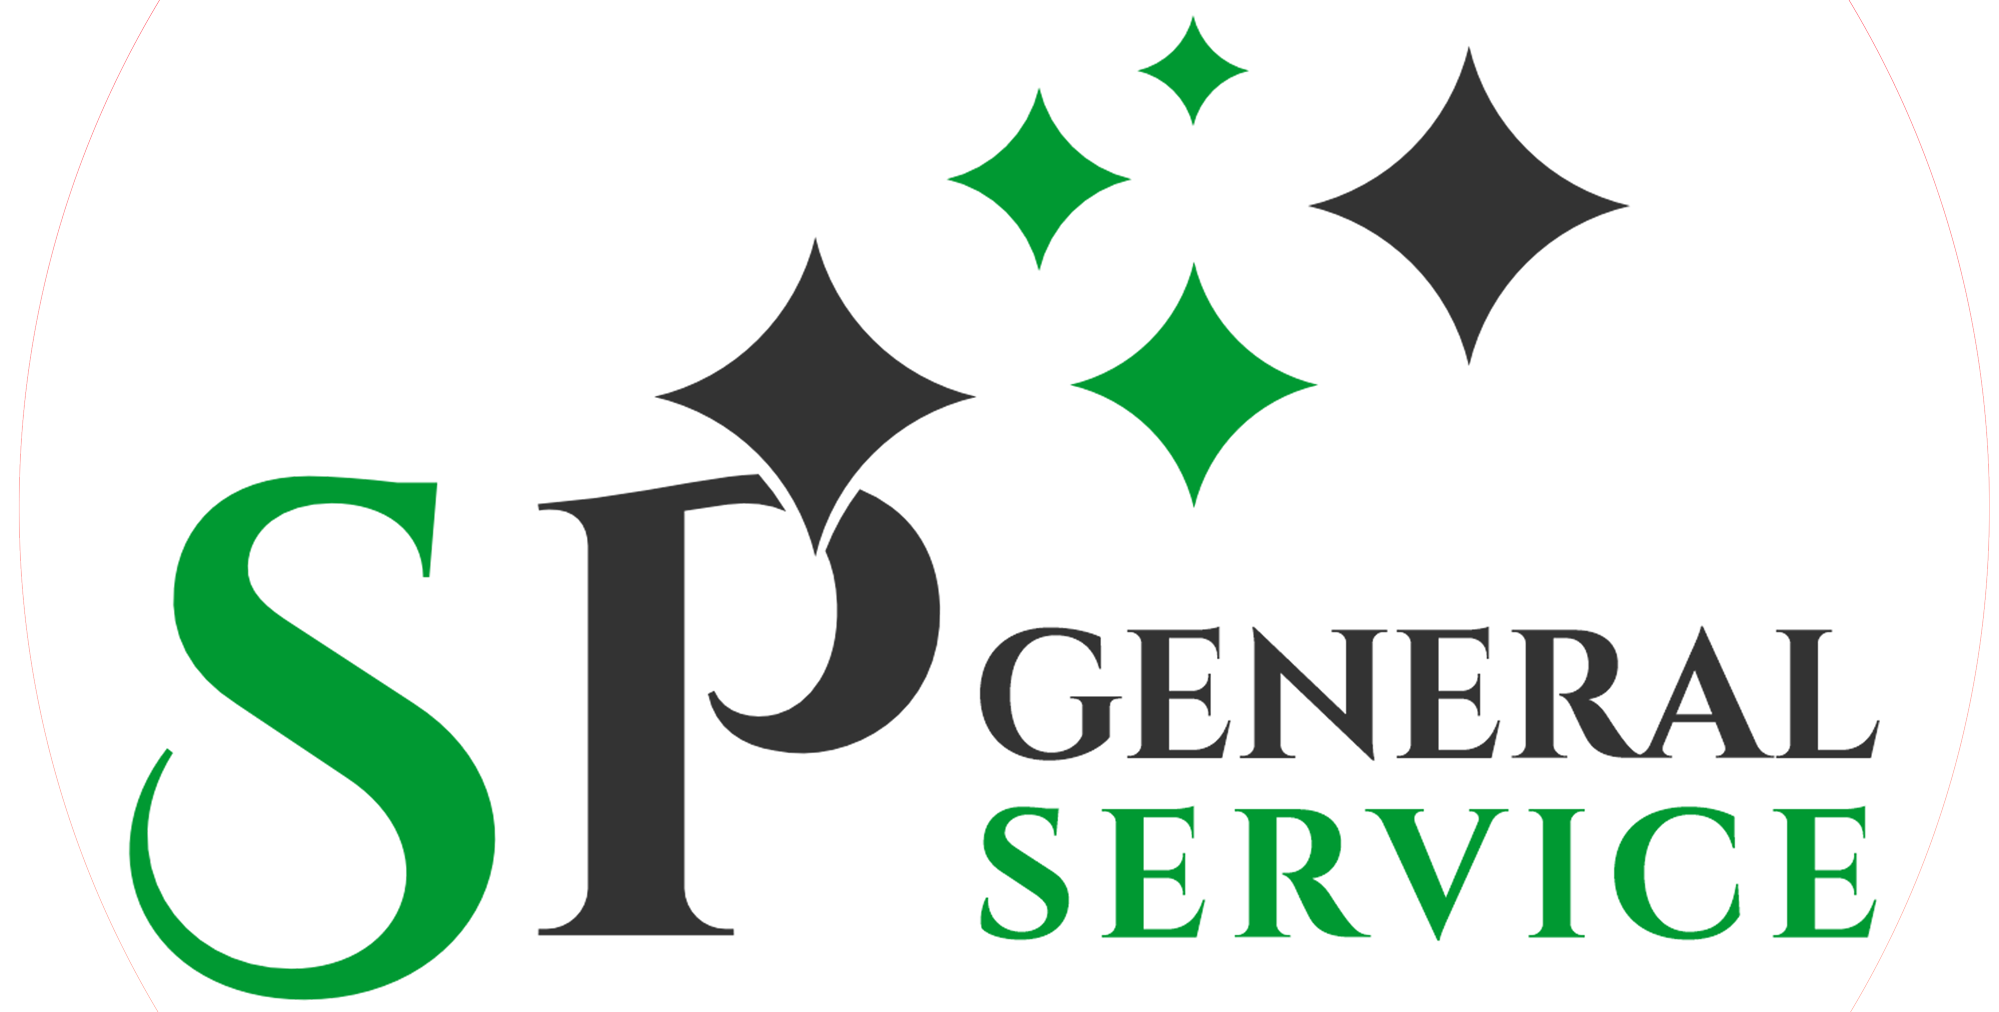 SP General Service Your House Cleaning in Boston – We office the best services for your house